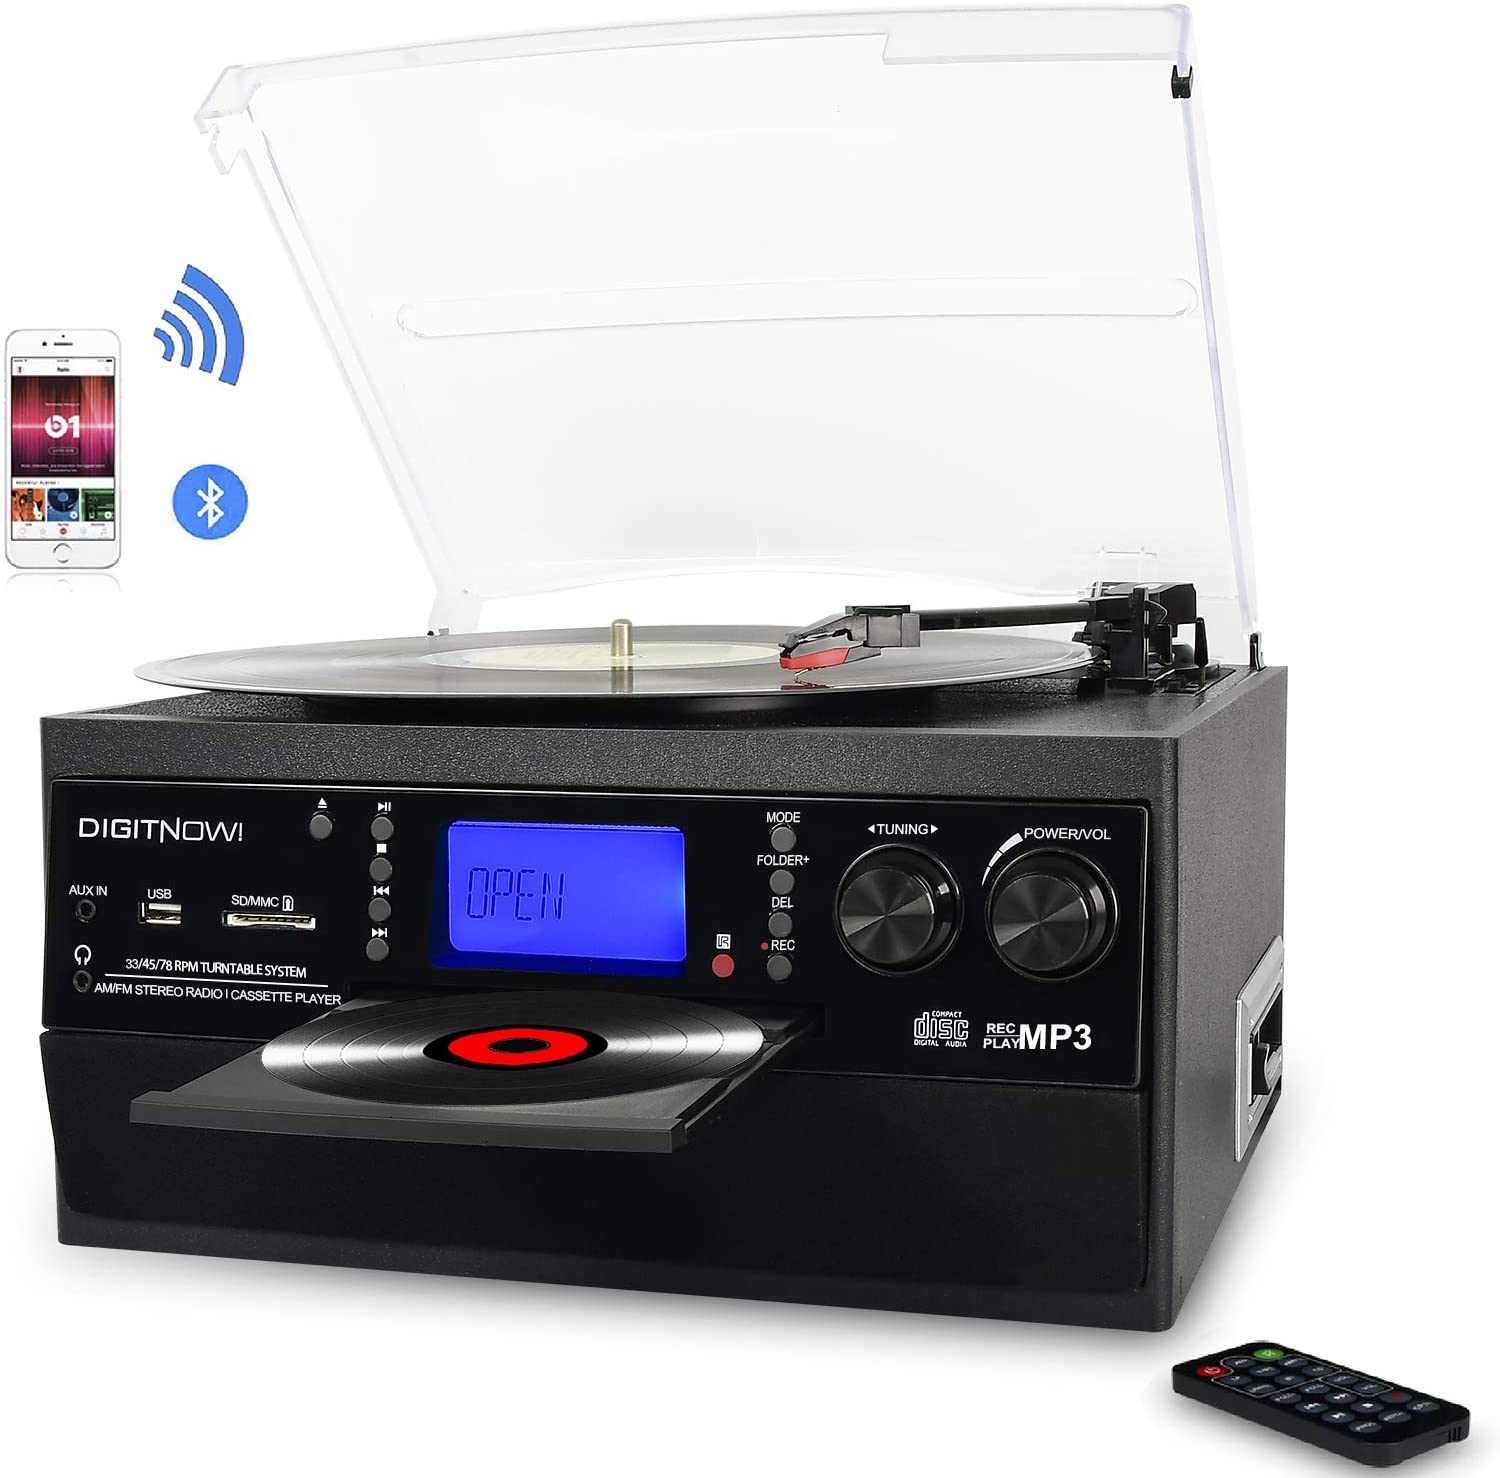 PS46, Suitcase Portable 3-Speed Stereo Turntable&FM Radio vinyl record to USB SD Built-in Speakers